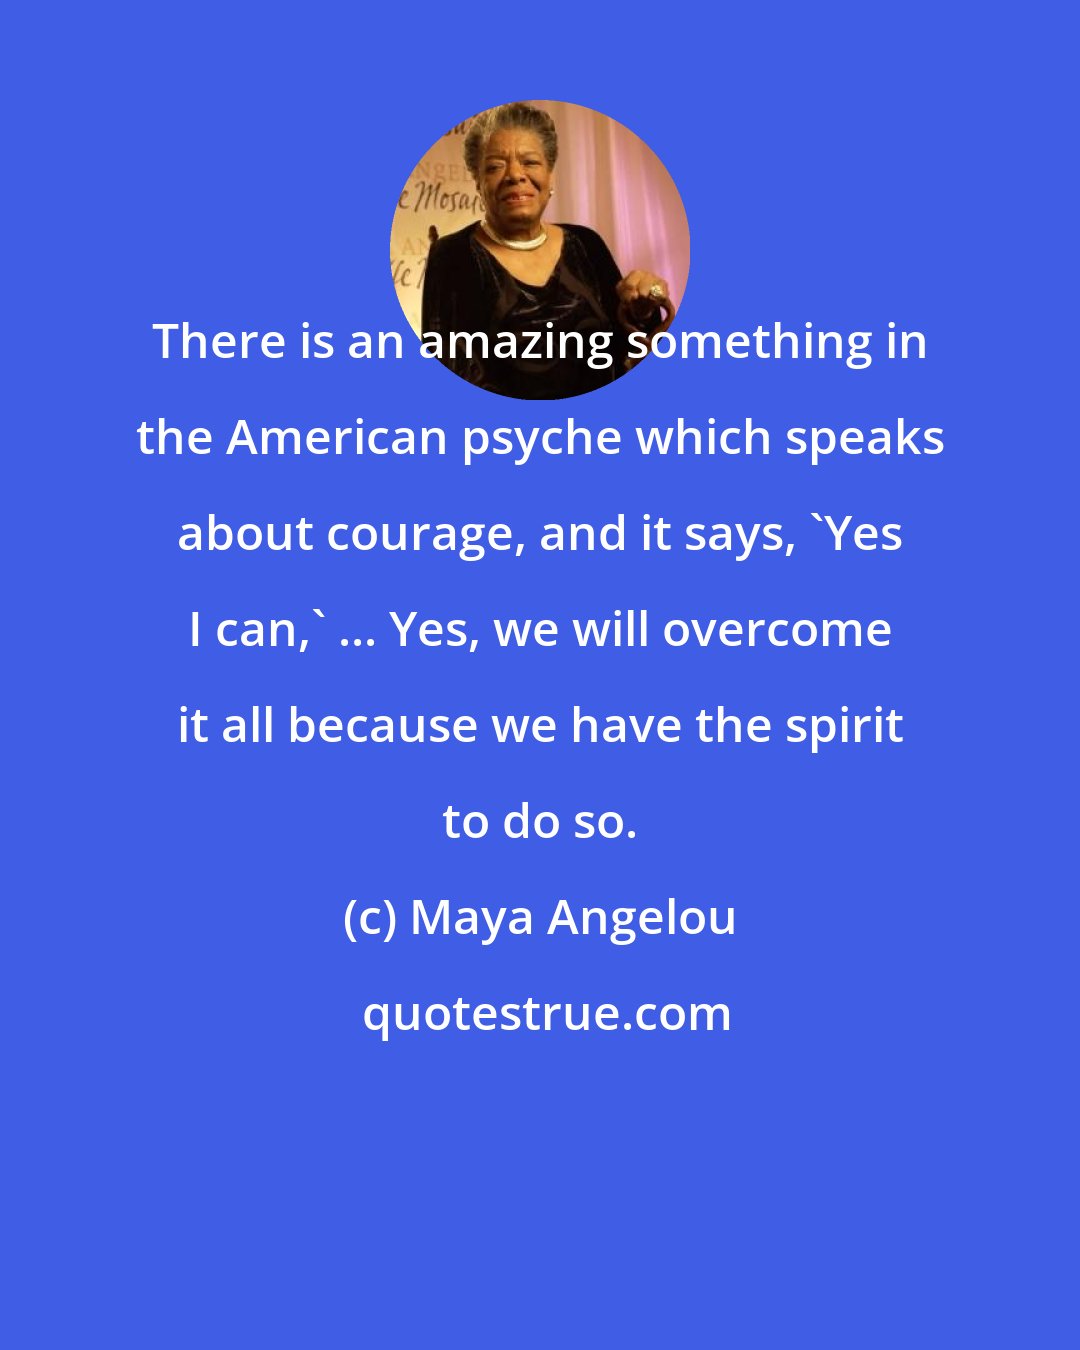 Maya Angelou: There is an amazing something in the American psyche which speaks about courage, and it says, 'Yes I can,' ... Yes, we will overcome it all because we have the spirit to do so.